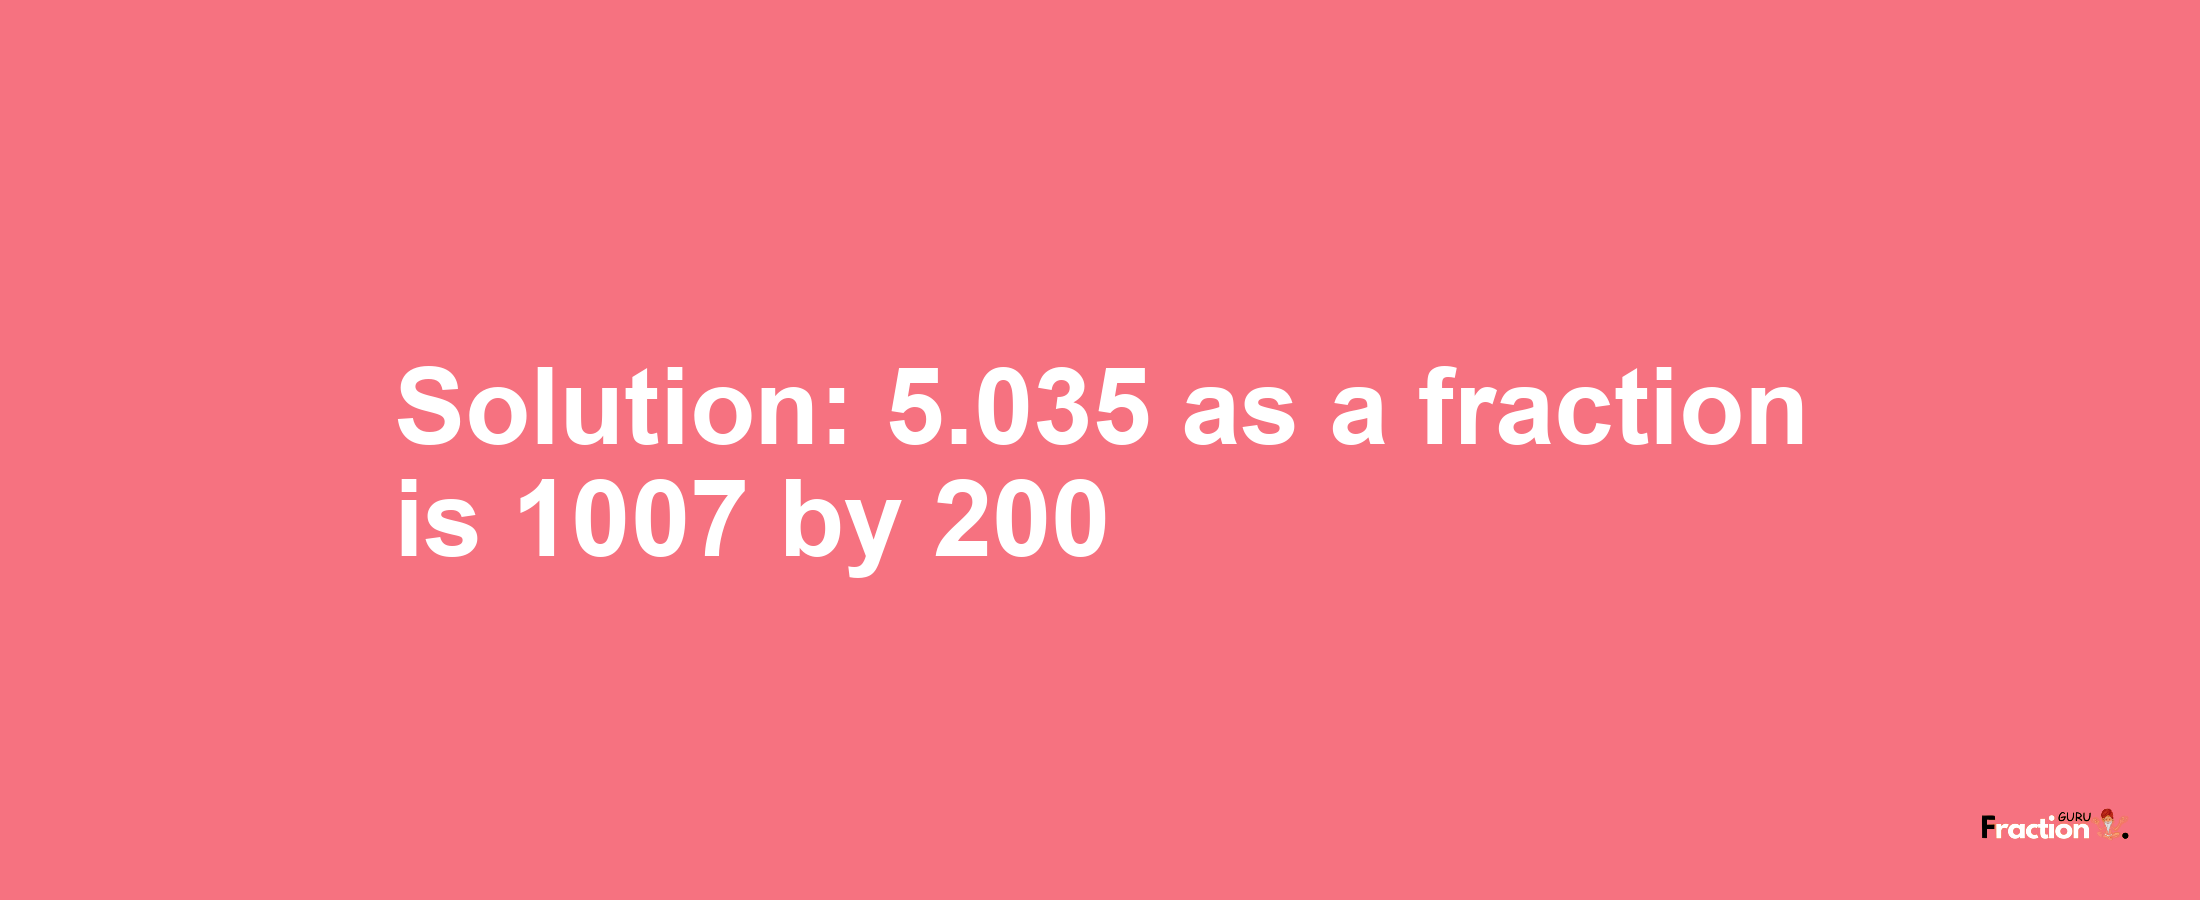 Solution:5.035 as a fraction is 1007/200